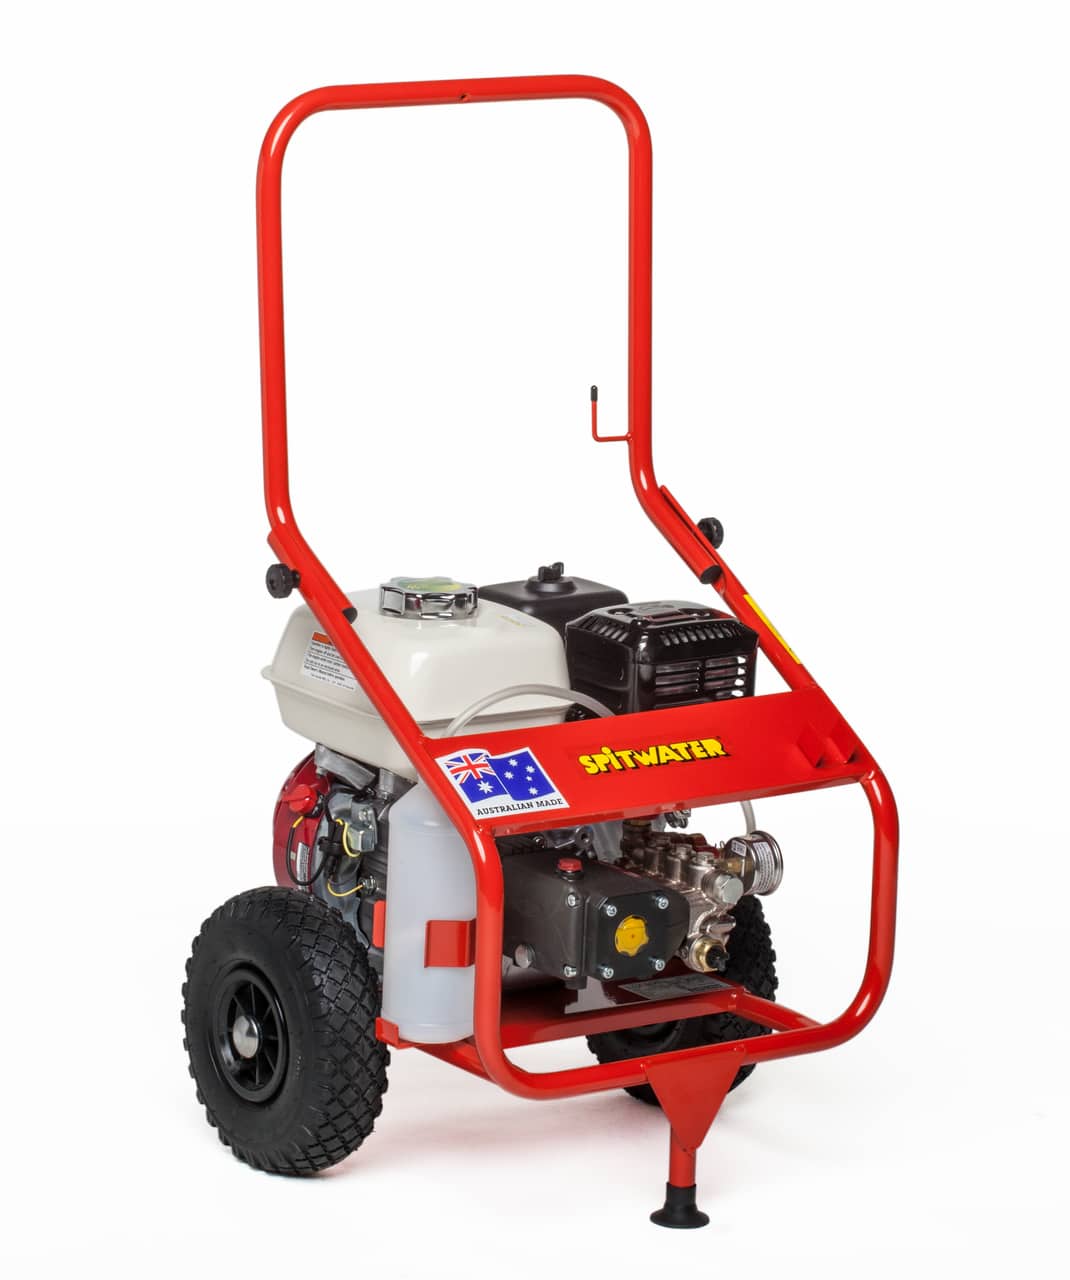 spitwater hobby petrol pressure cleaners - supplier in Rockhampton QLD